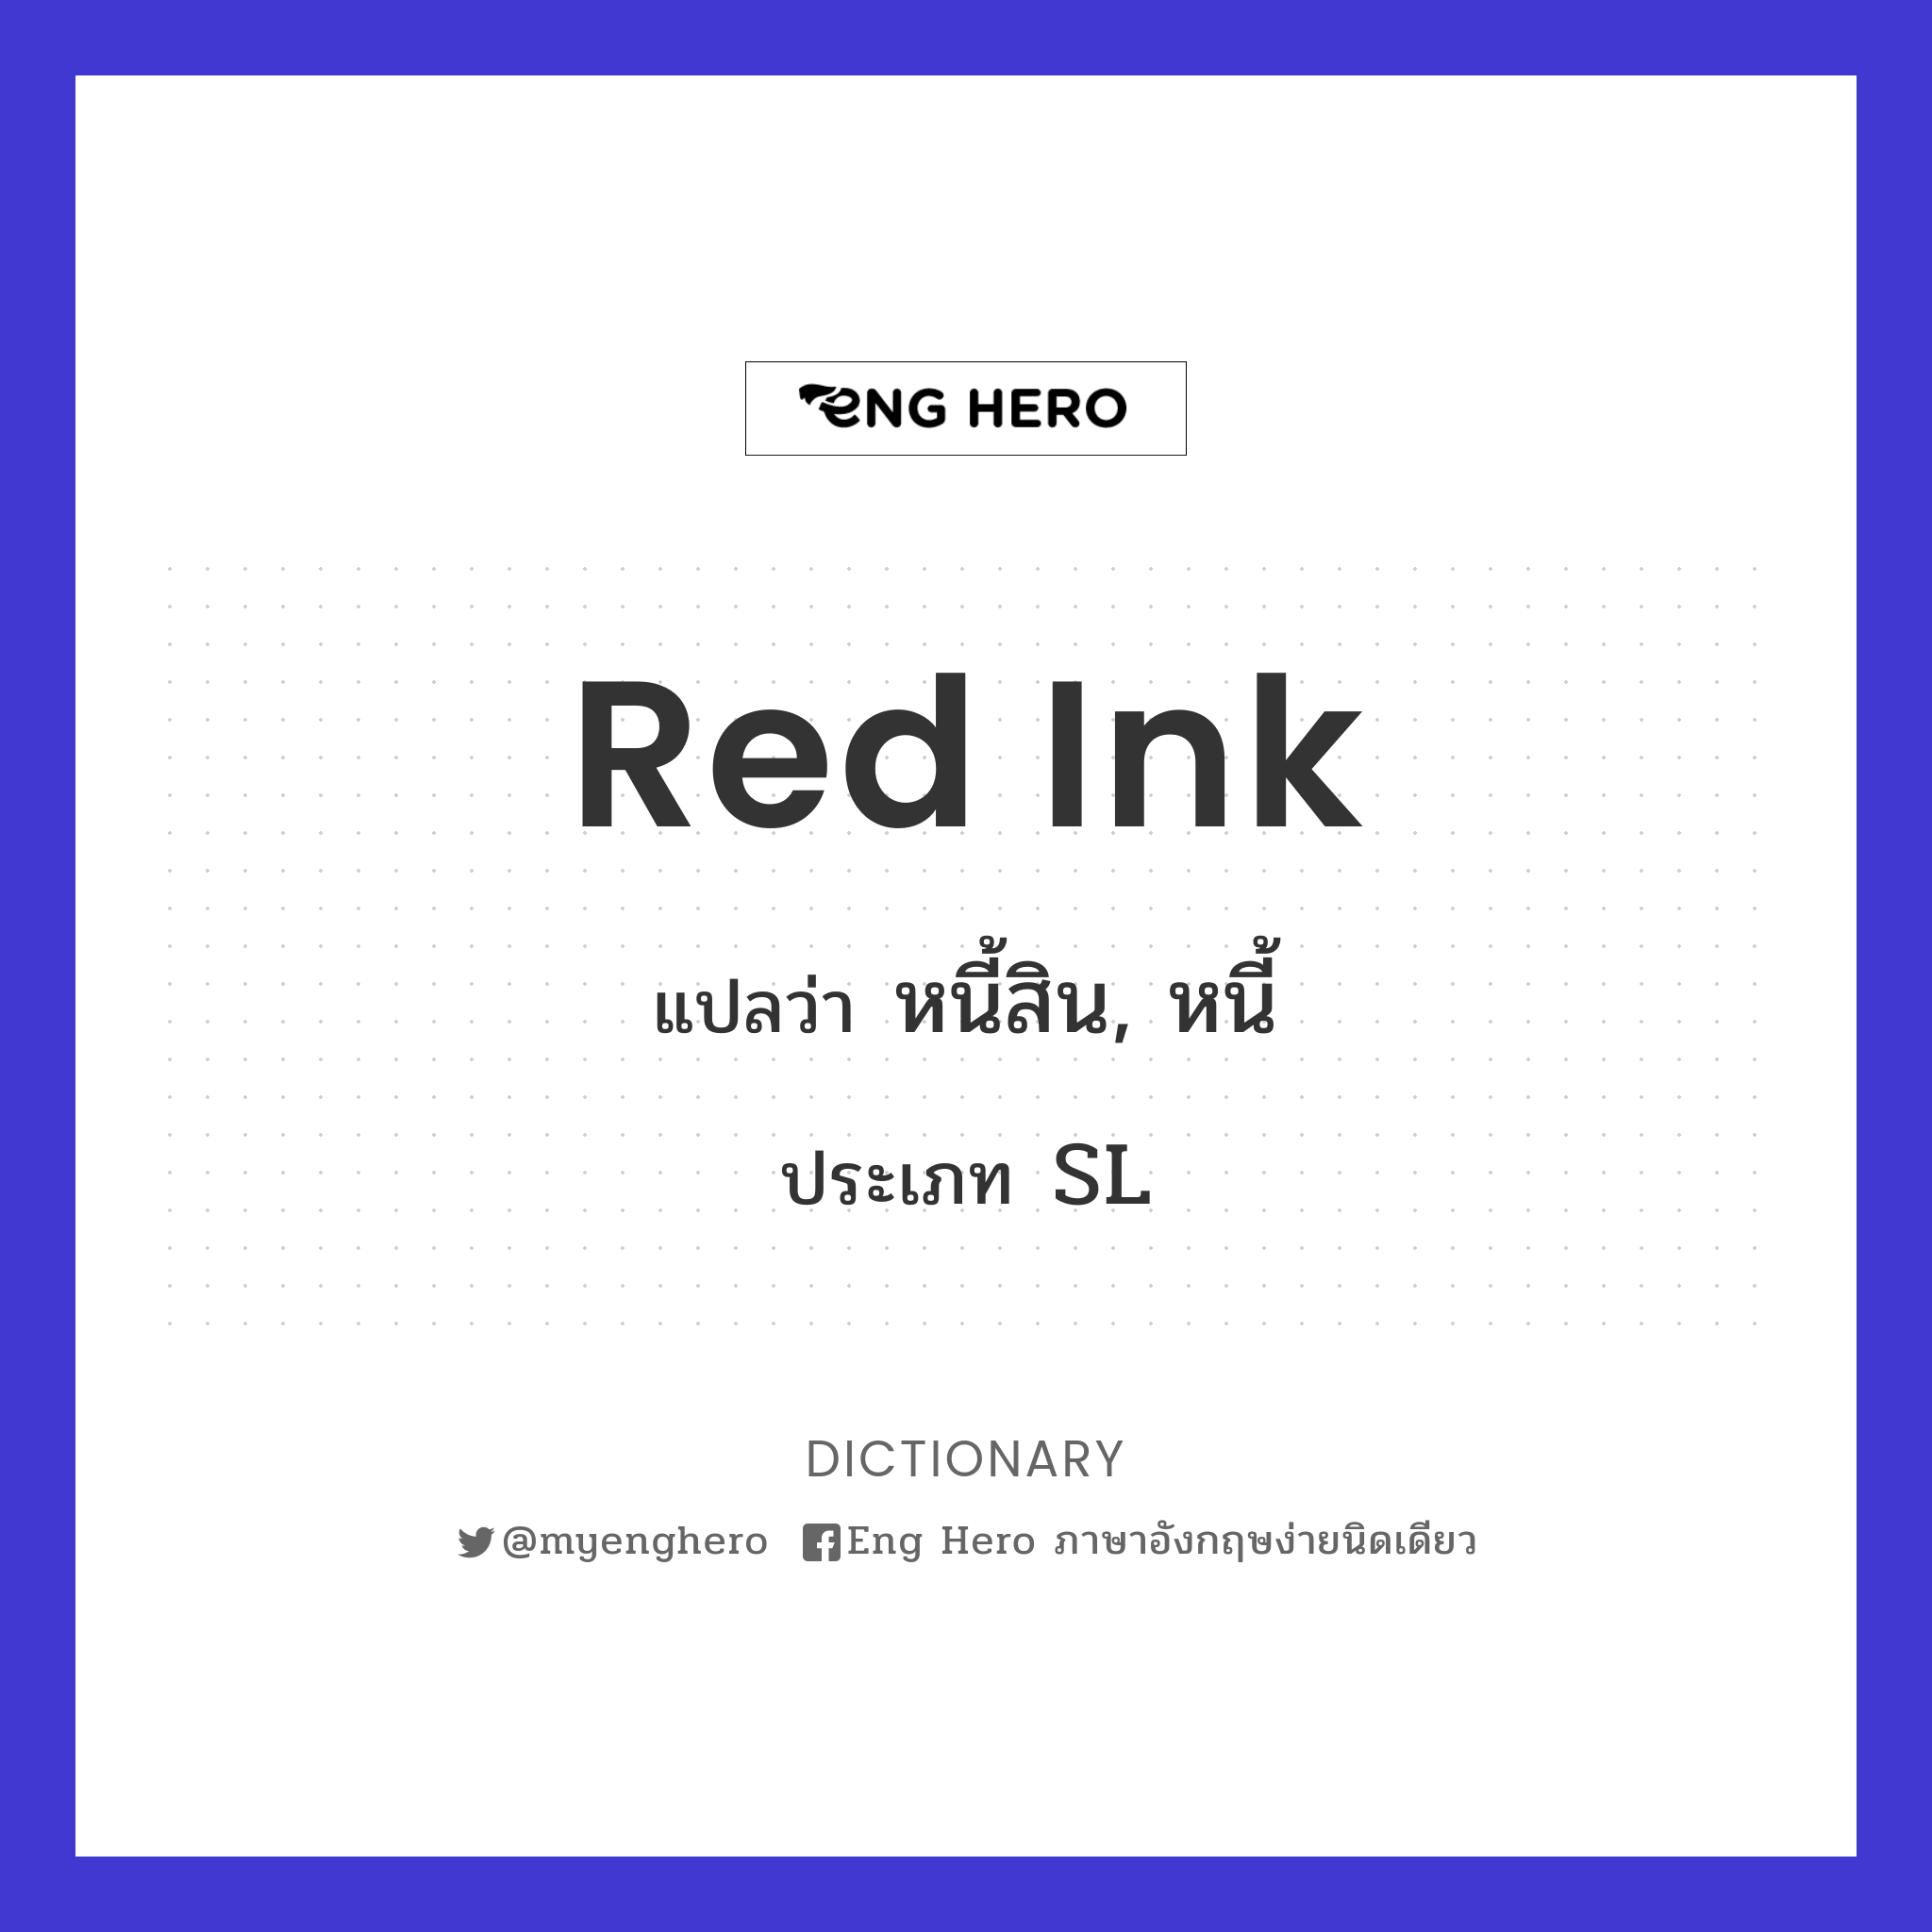 red ink